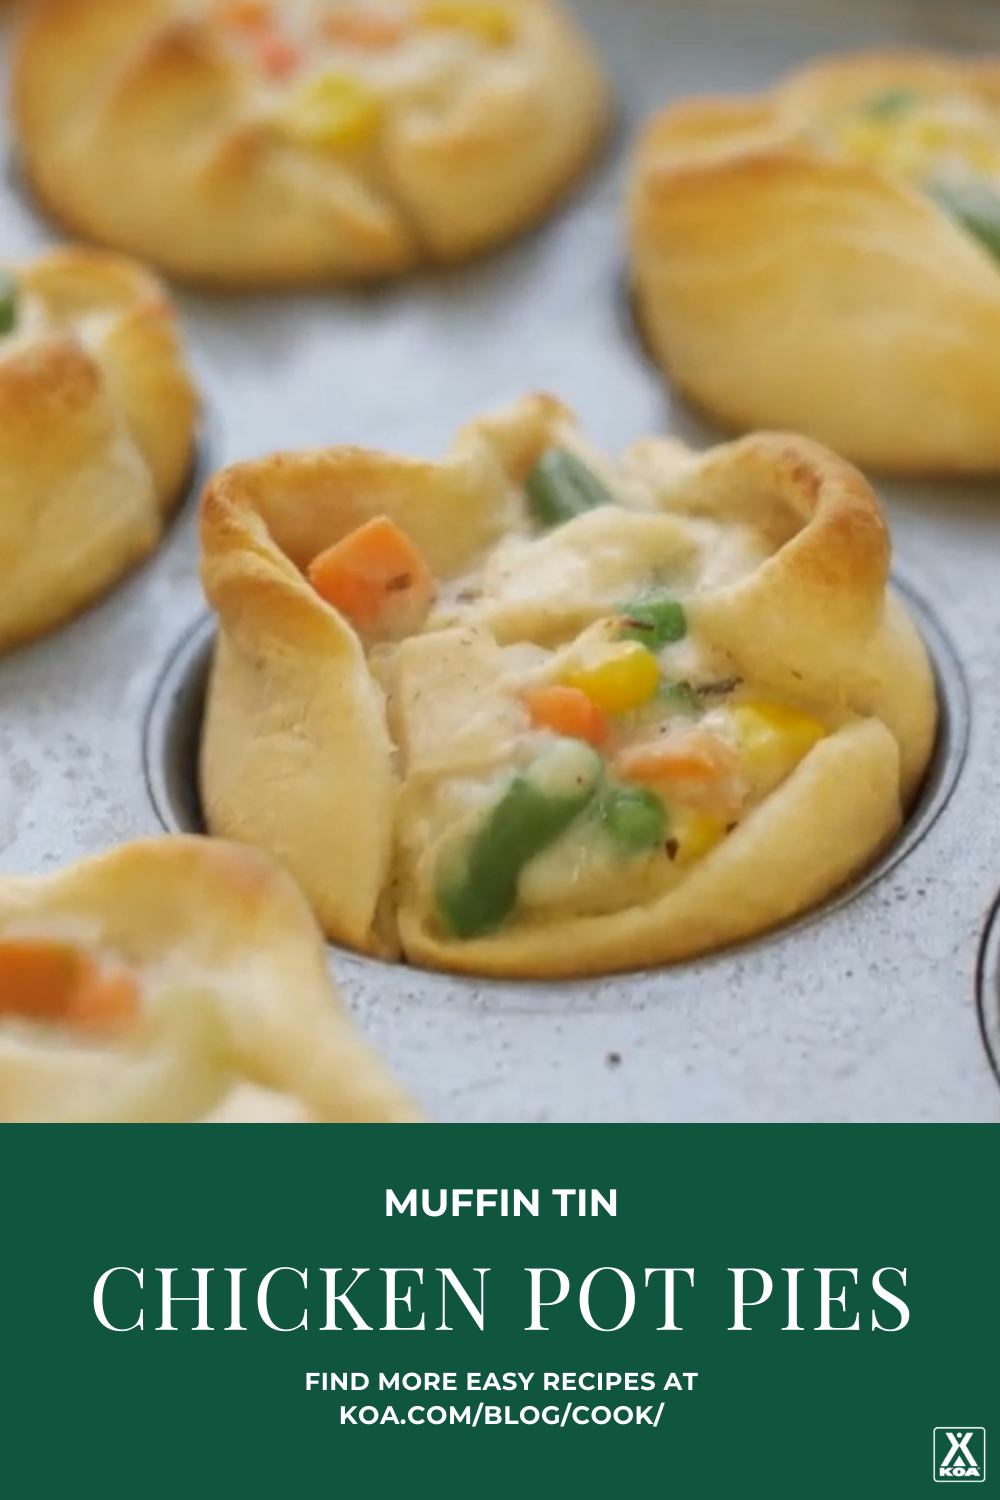 An easy recipe to make ahead and reheat at your campsite, our easy muffin tin chicken pot pies are sure to please a camping crowd.